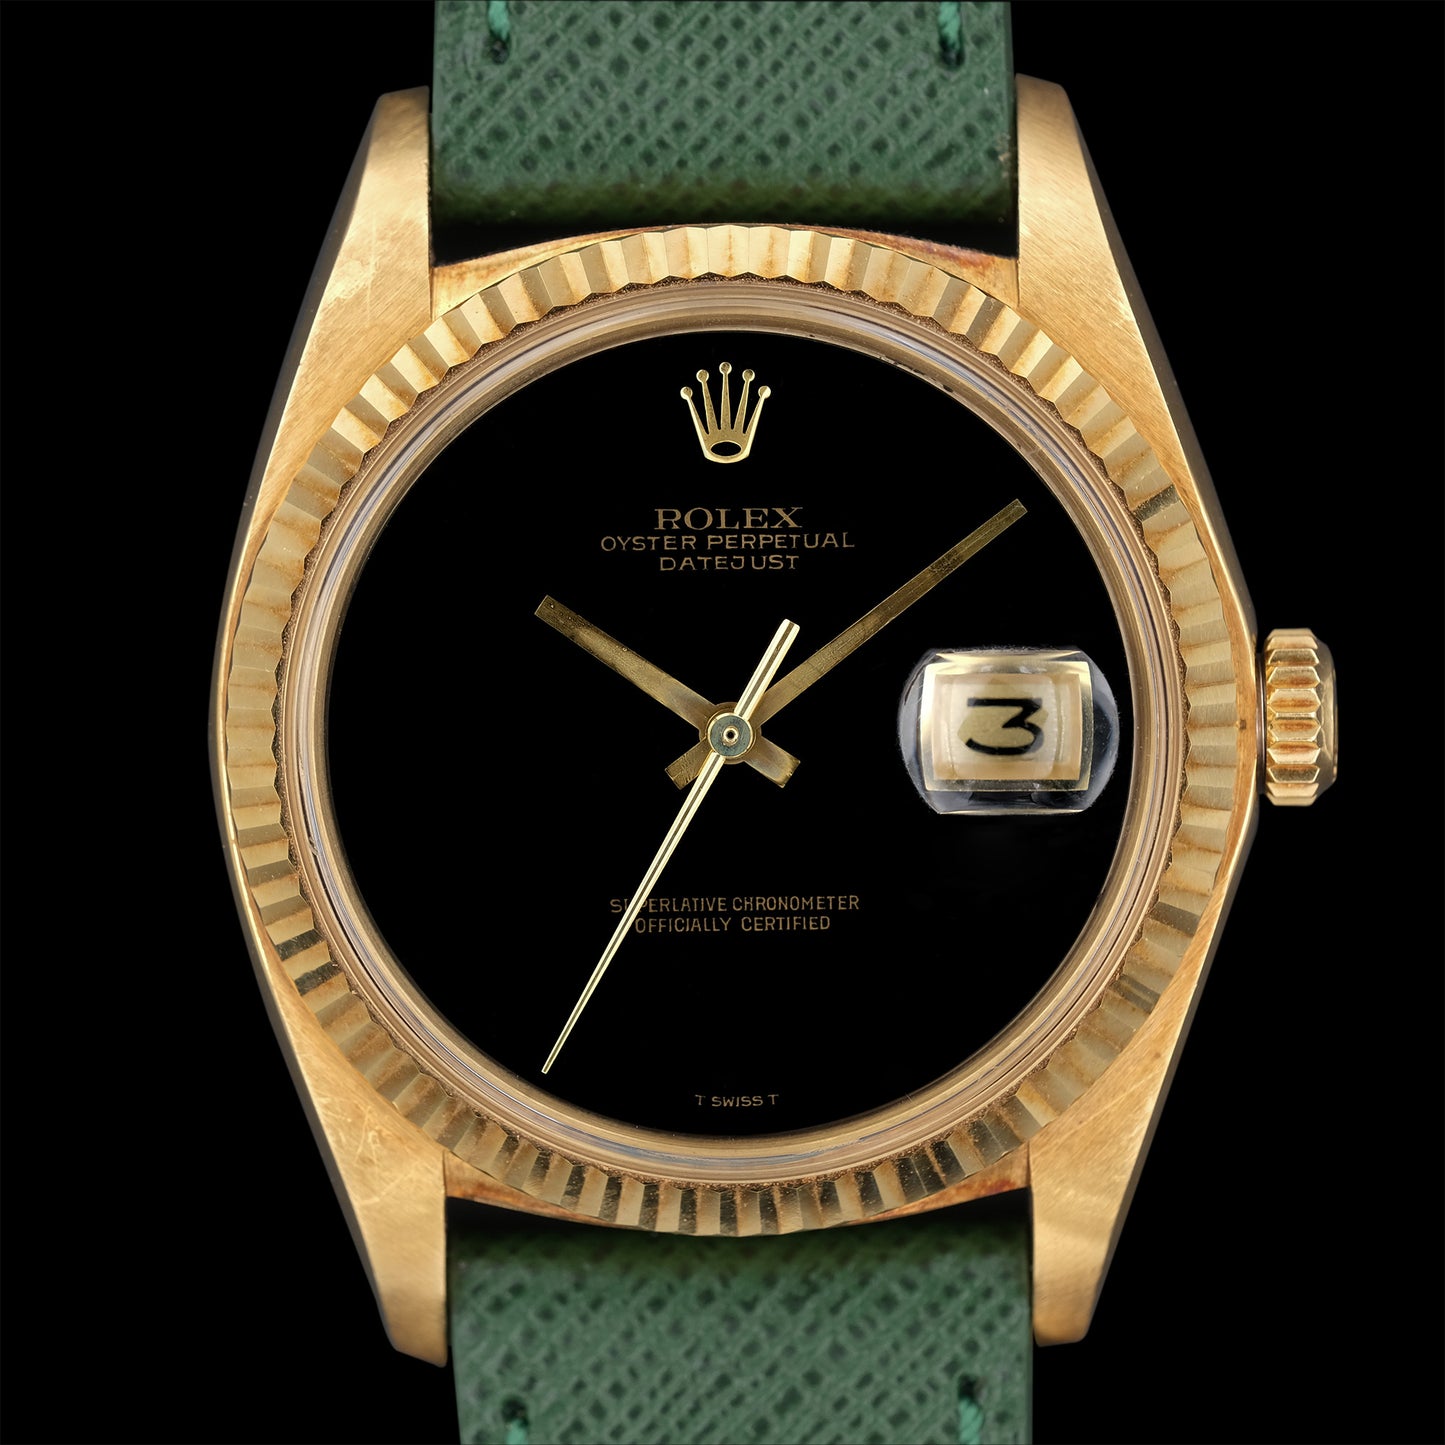 Rolex Datejust Onyx Dial ref.1601 from 1976